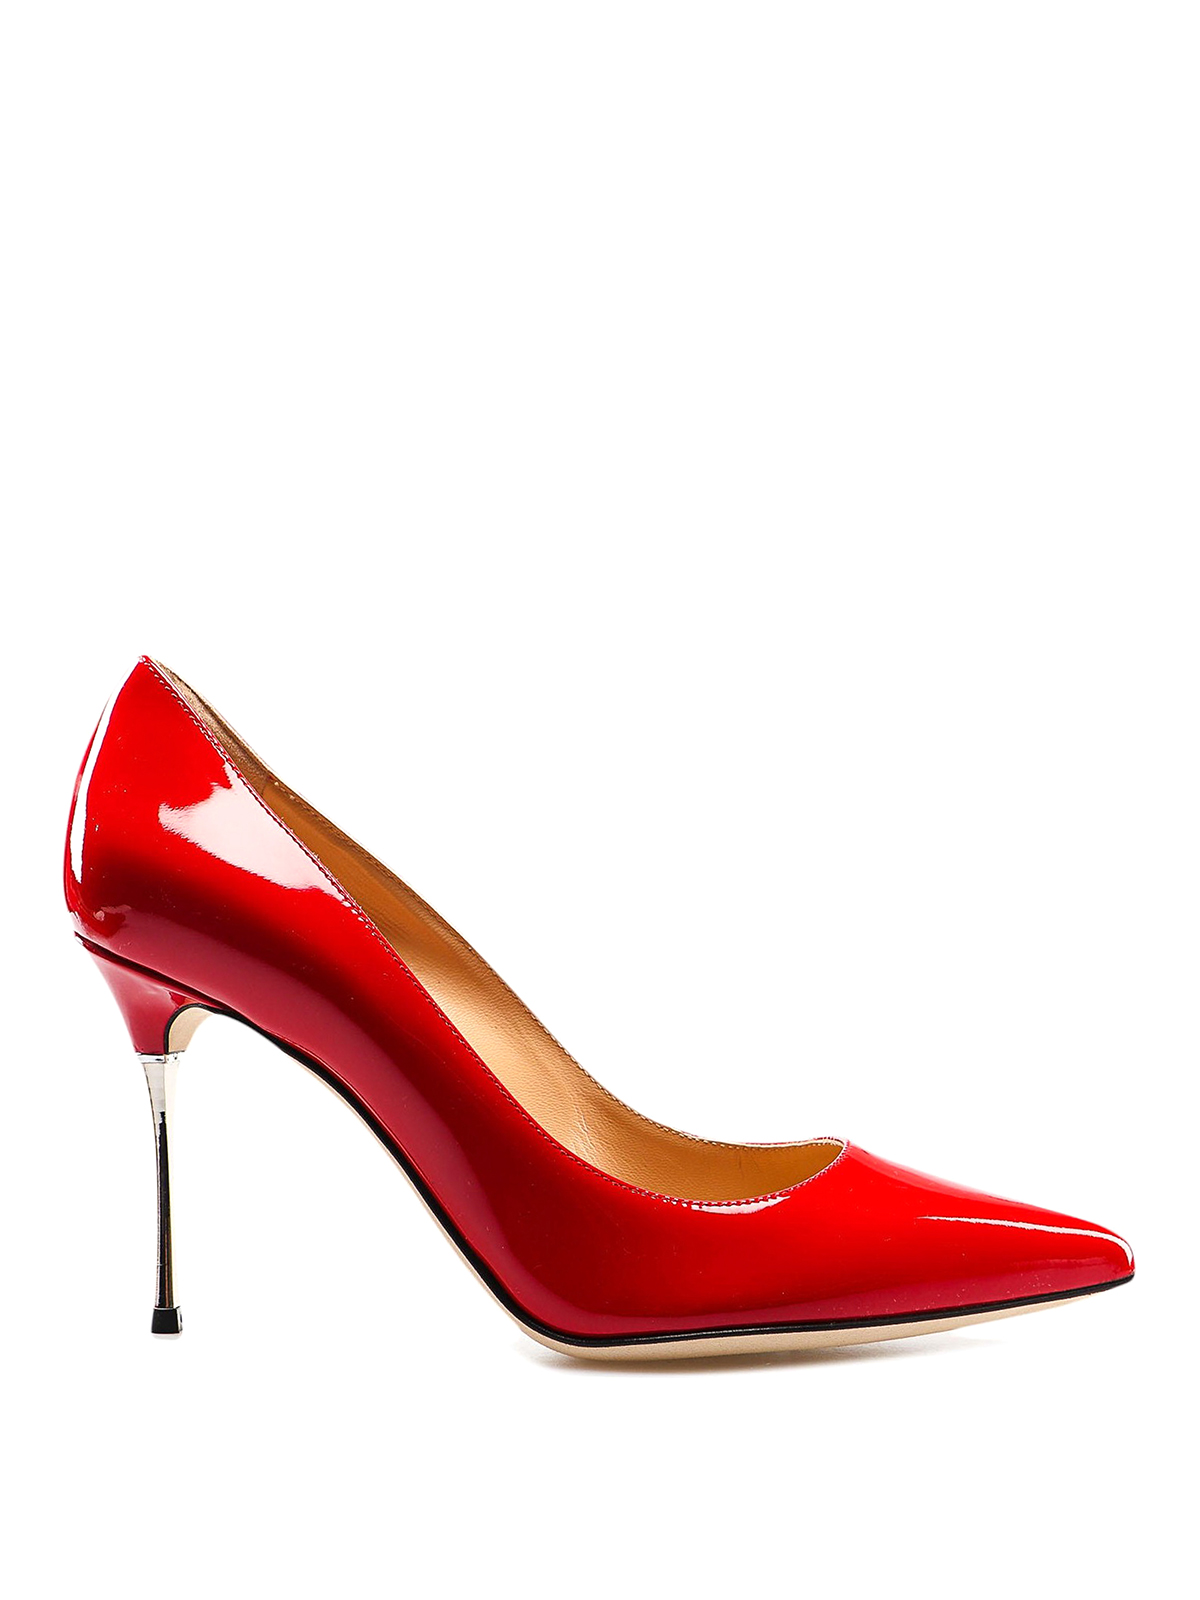 Sergio Rossi red heels赤ヒール